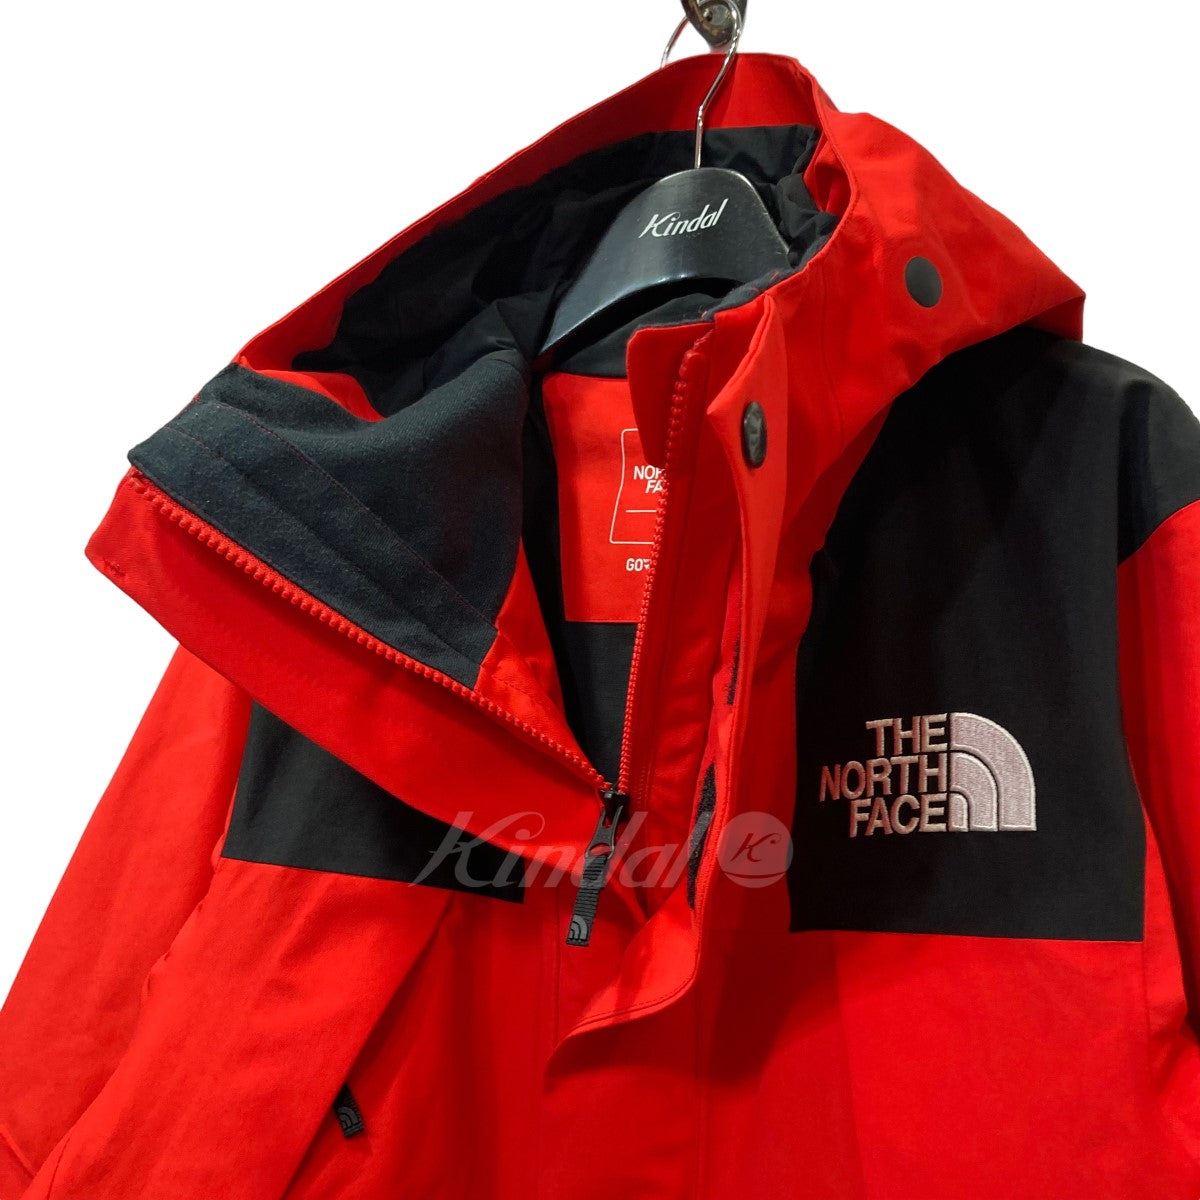 THE NORTH FACE(ザノースフェイス) NP61800「Mountain Jacket ...